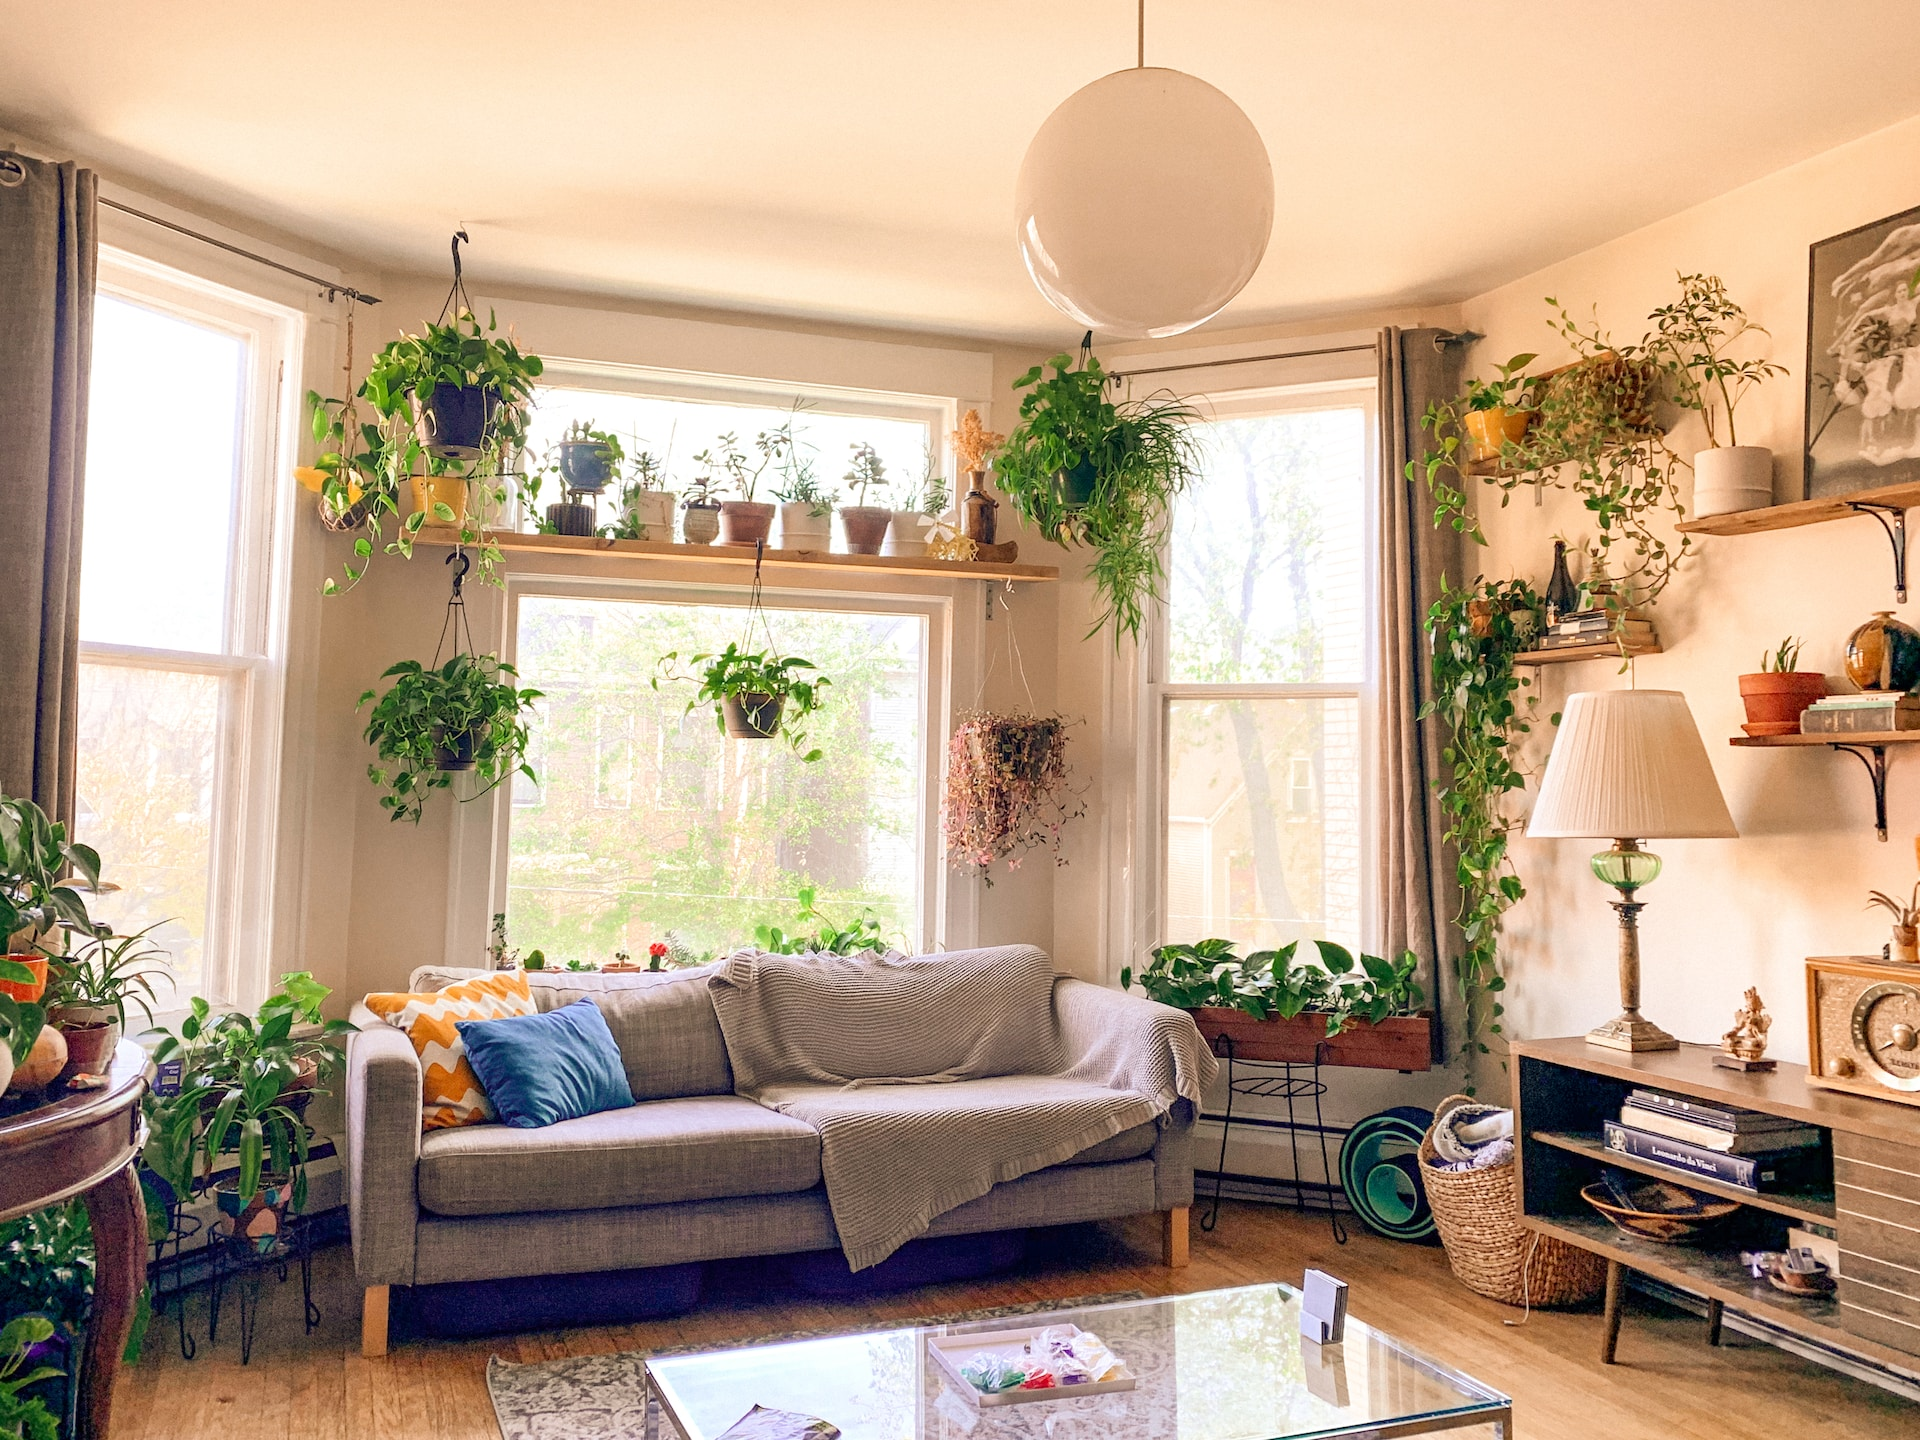 Frequently Asked Questions for Indoor Gardening Ideas